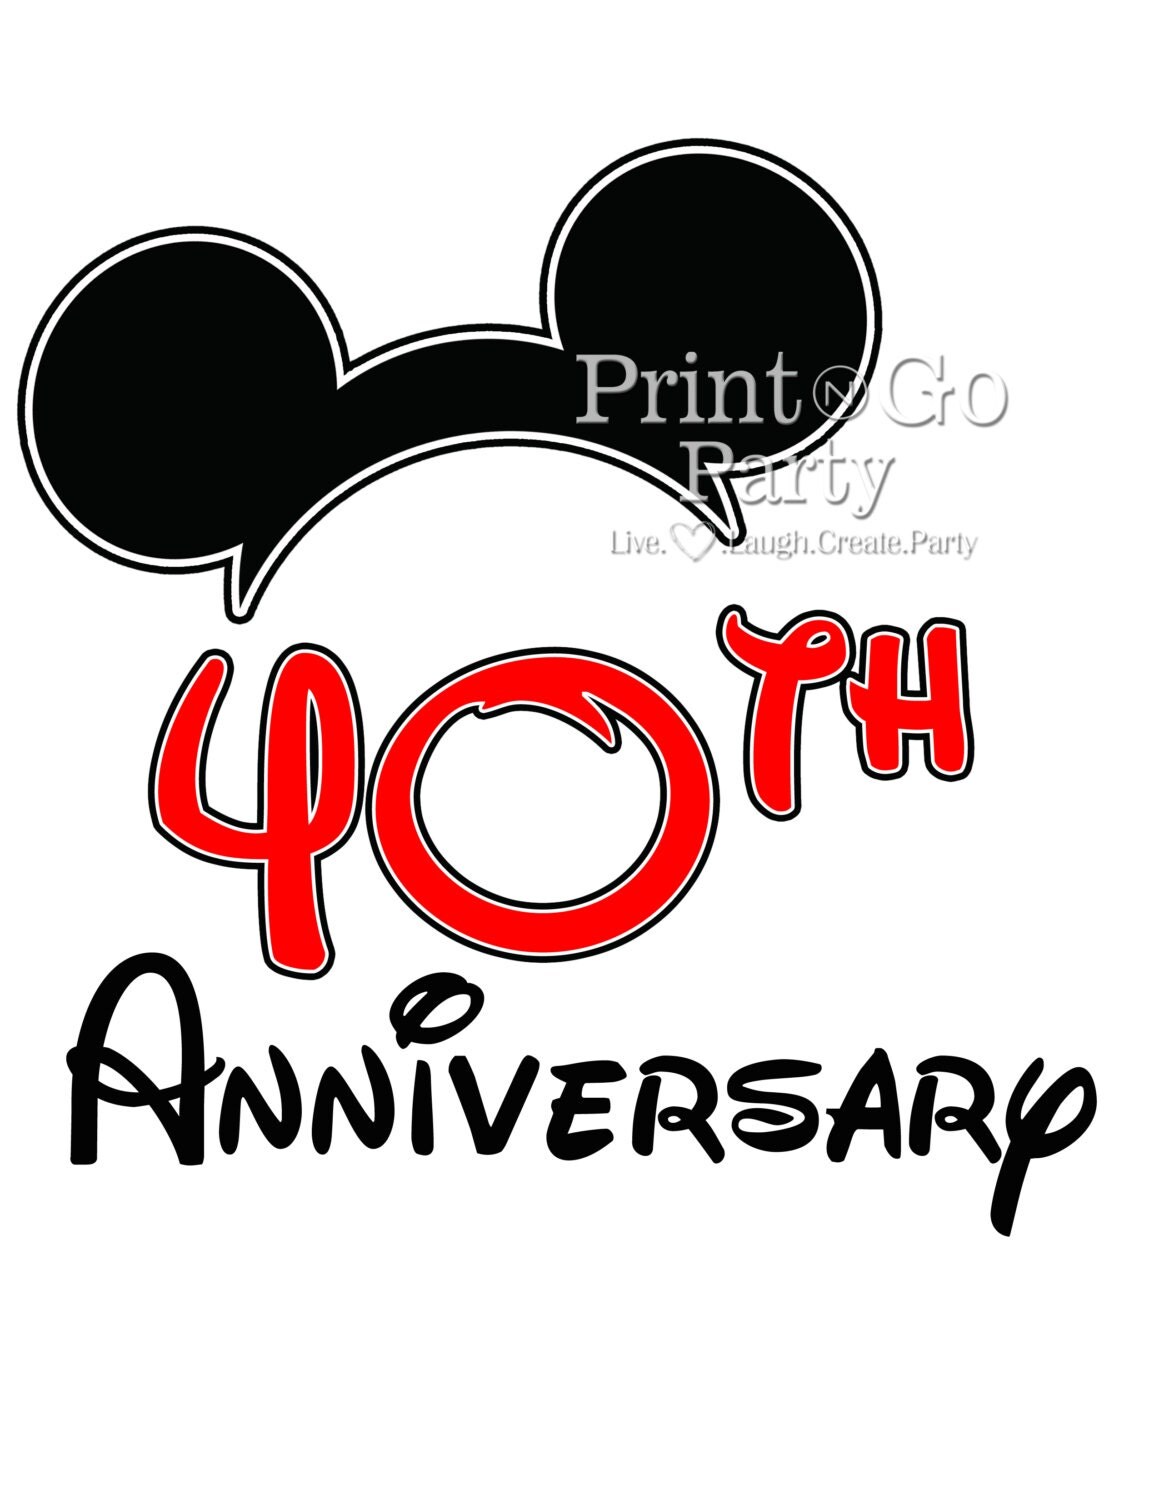 Disney Mickey 40th Anniversary Iron on by PrintAndGoParty on Etsy